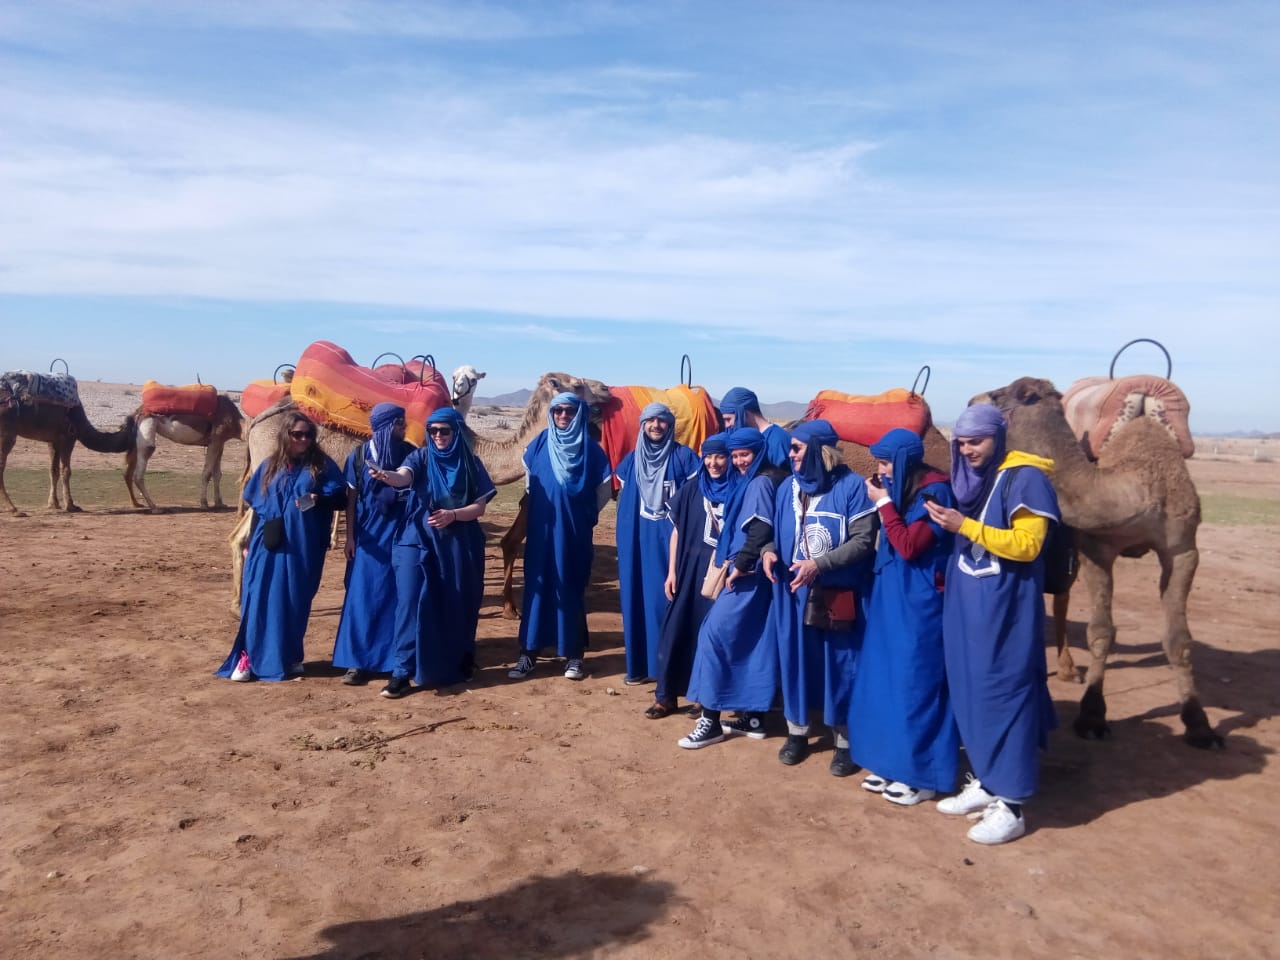 Camel Ride adventures in Palm grove Marrakech: 2 hour